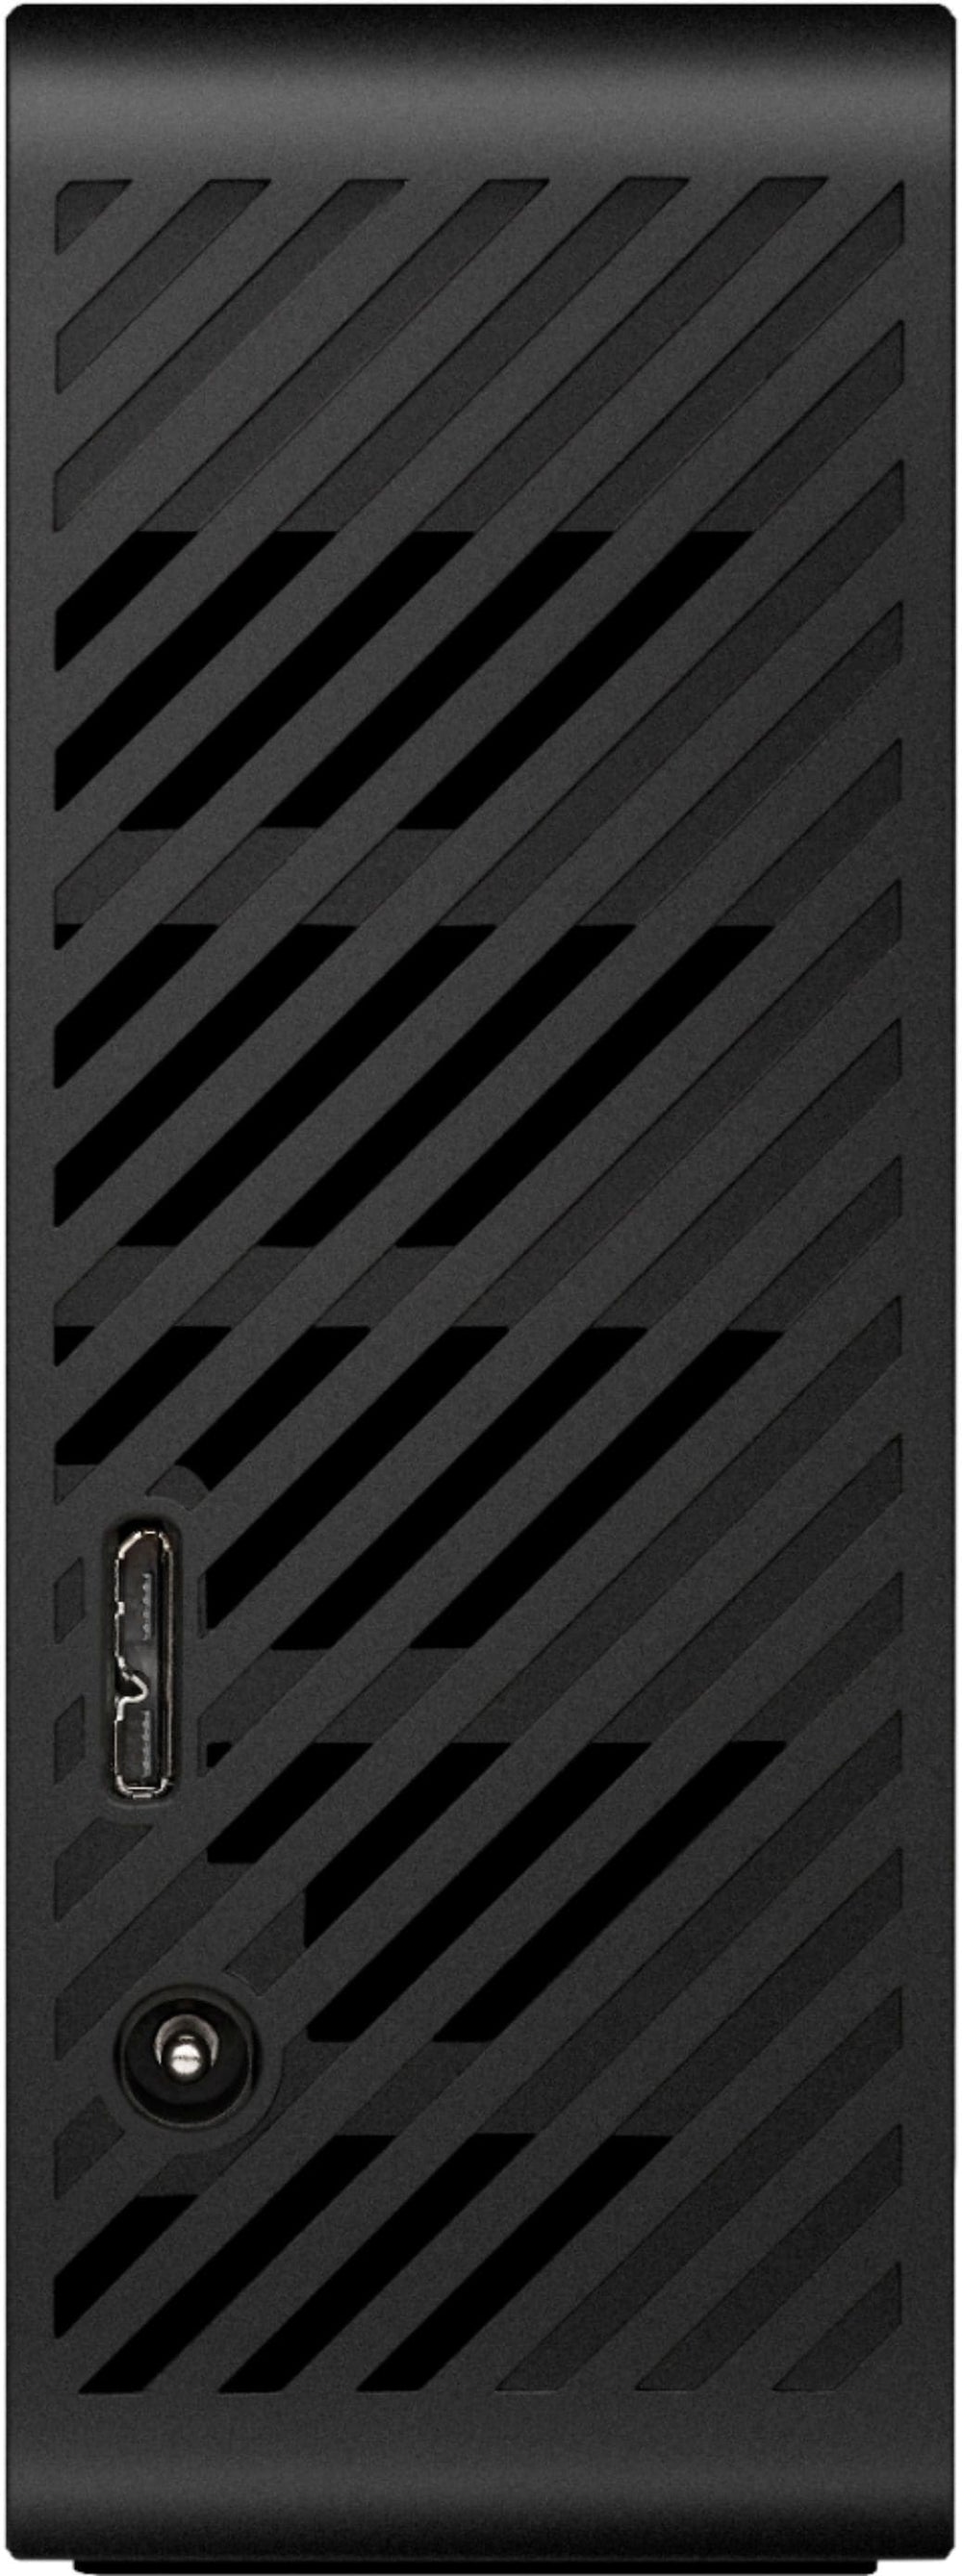 Seagate - Expansion 14TB External USB 3.0 Portable Hard Drive with Rescue Data Recovery Services - Black_1